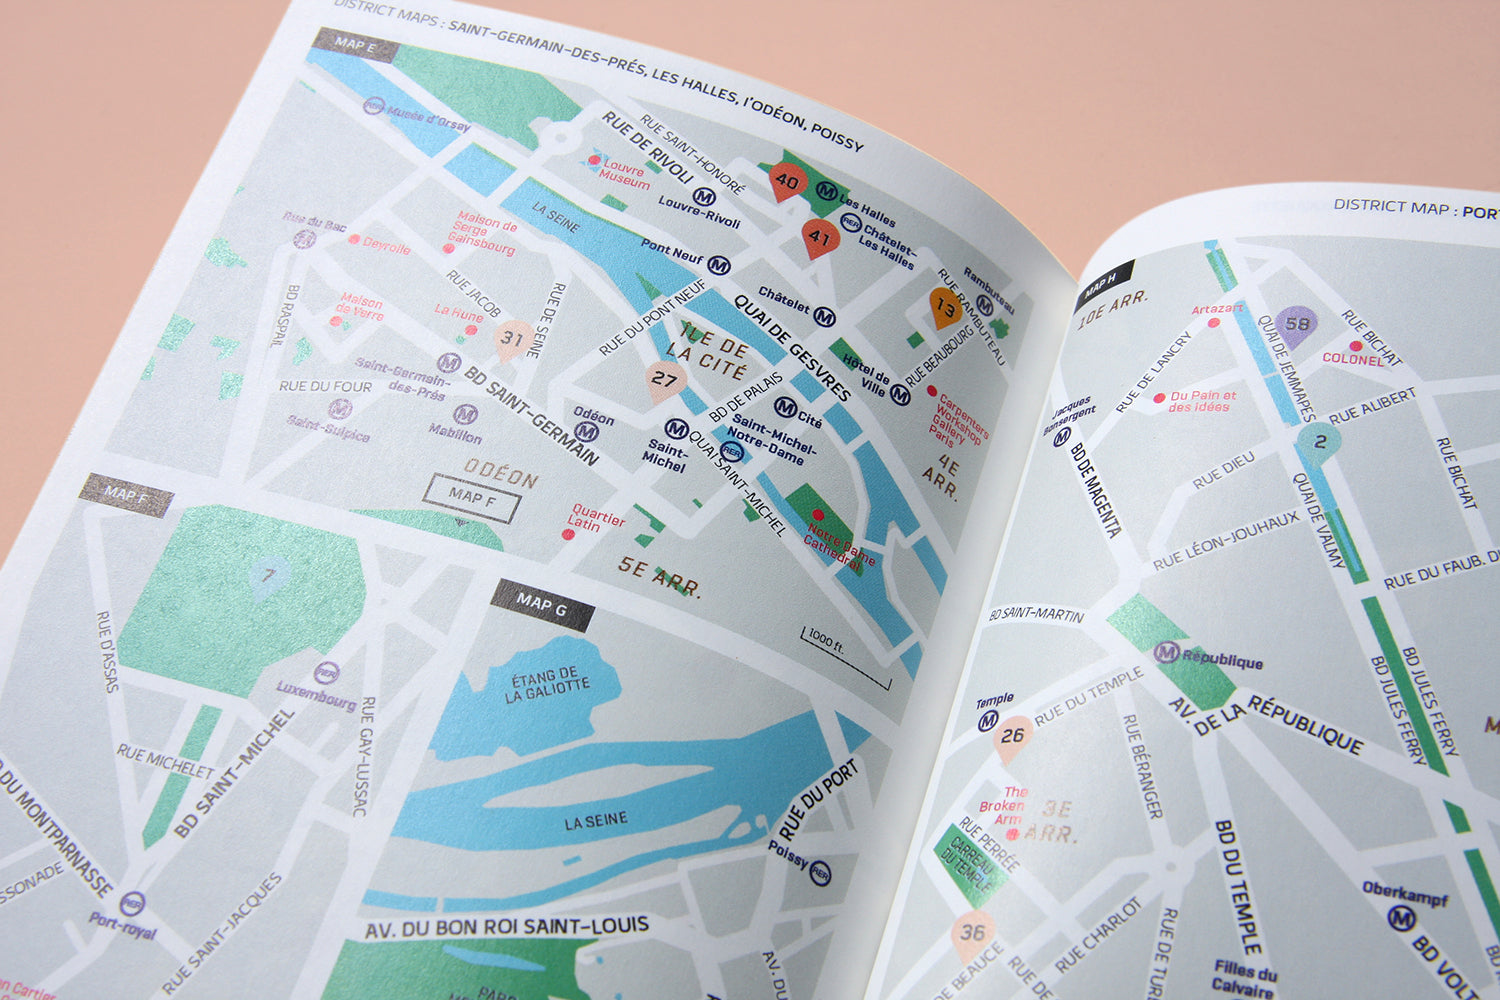 City Guide Paris, English Version - Books and Stationery